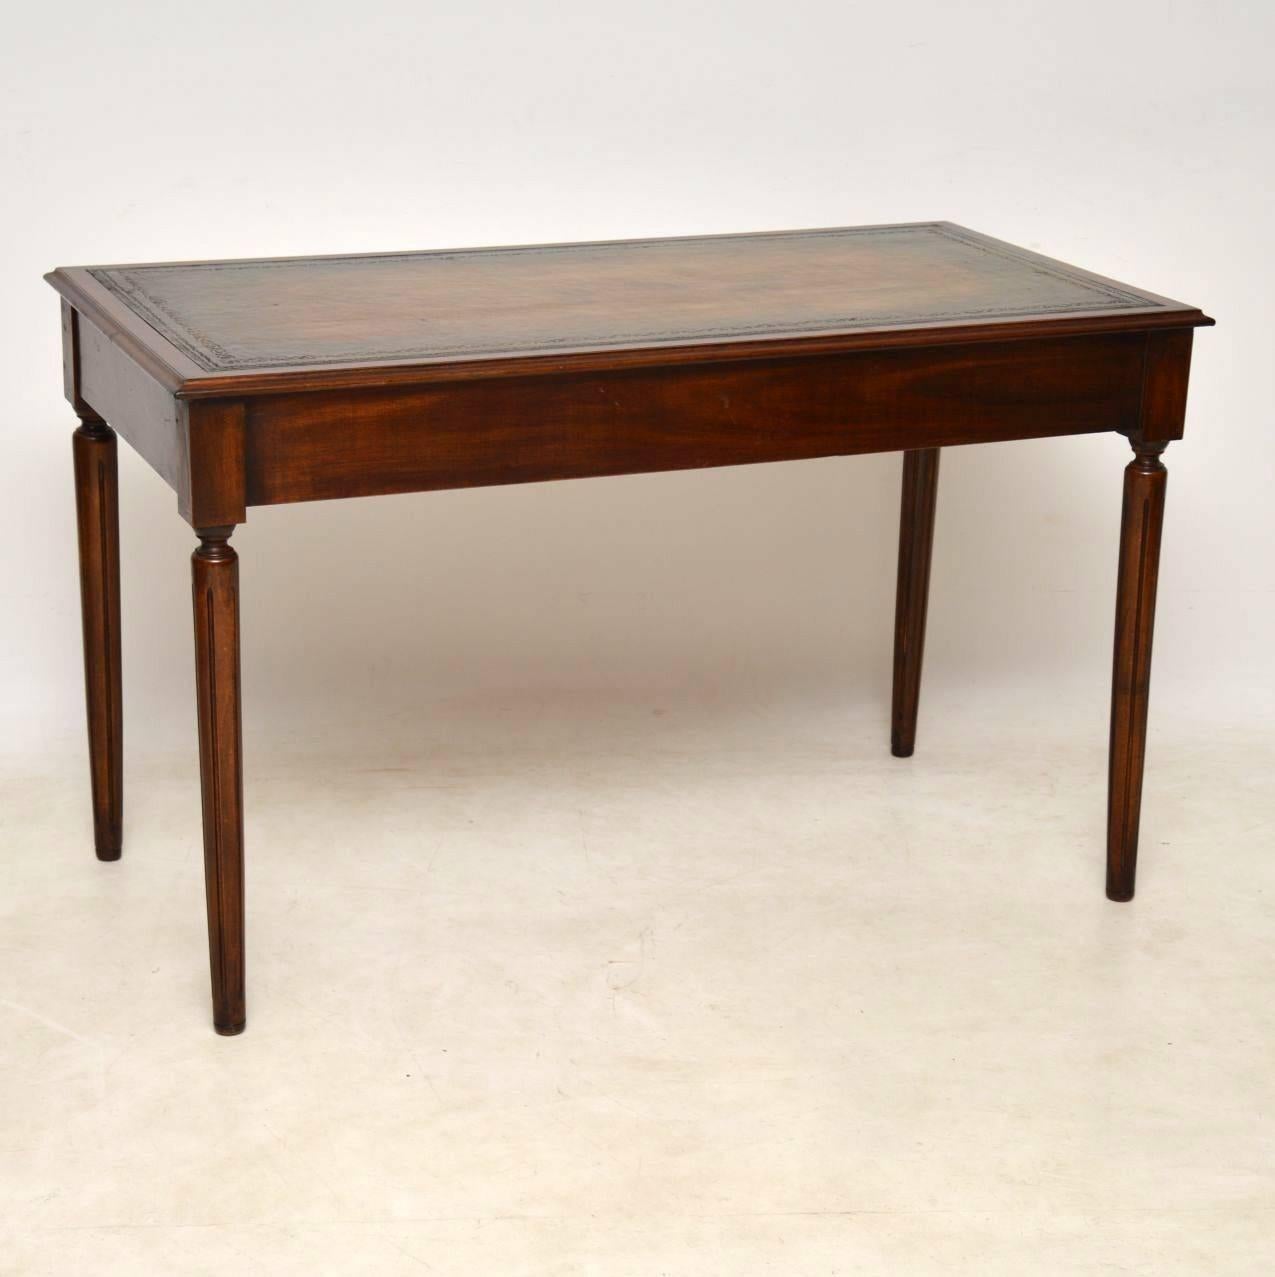 Victorian Antique Mahogany Leather Top Writing Table